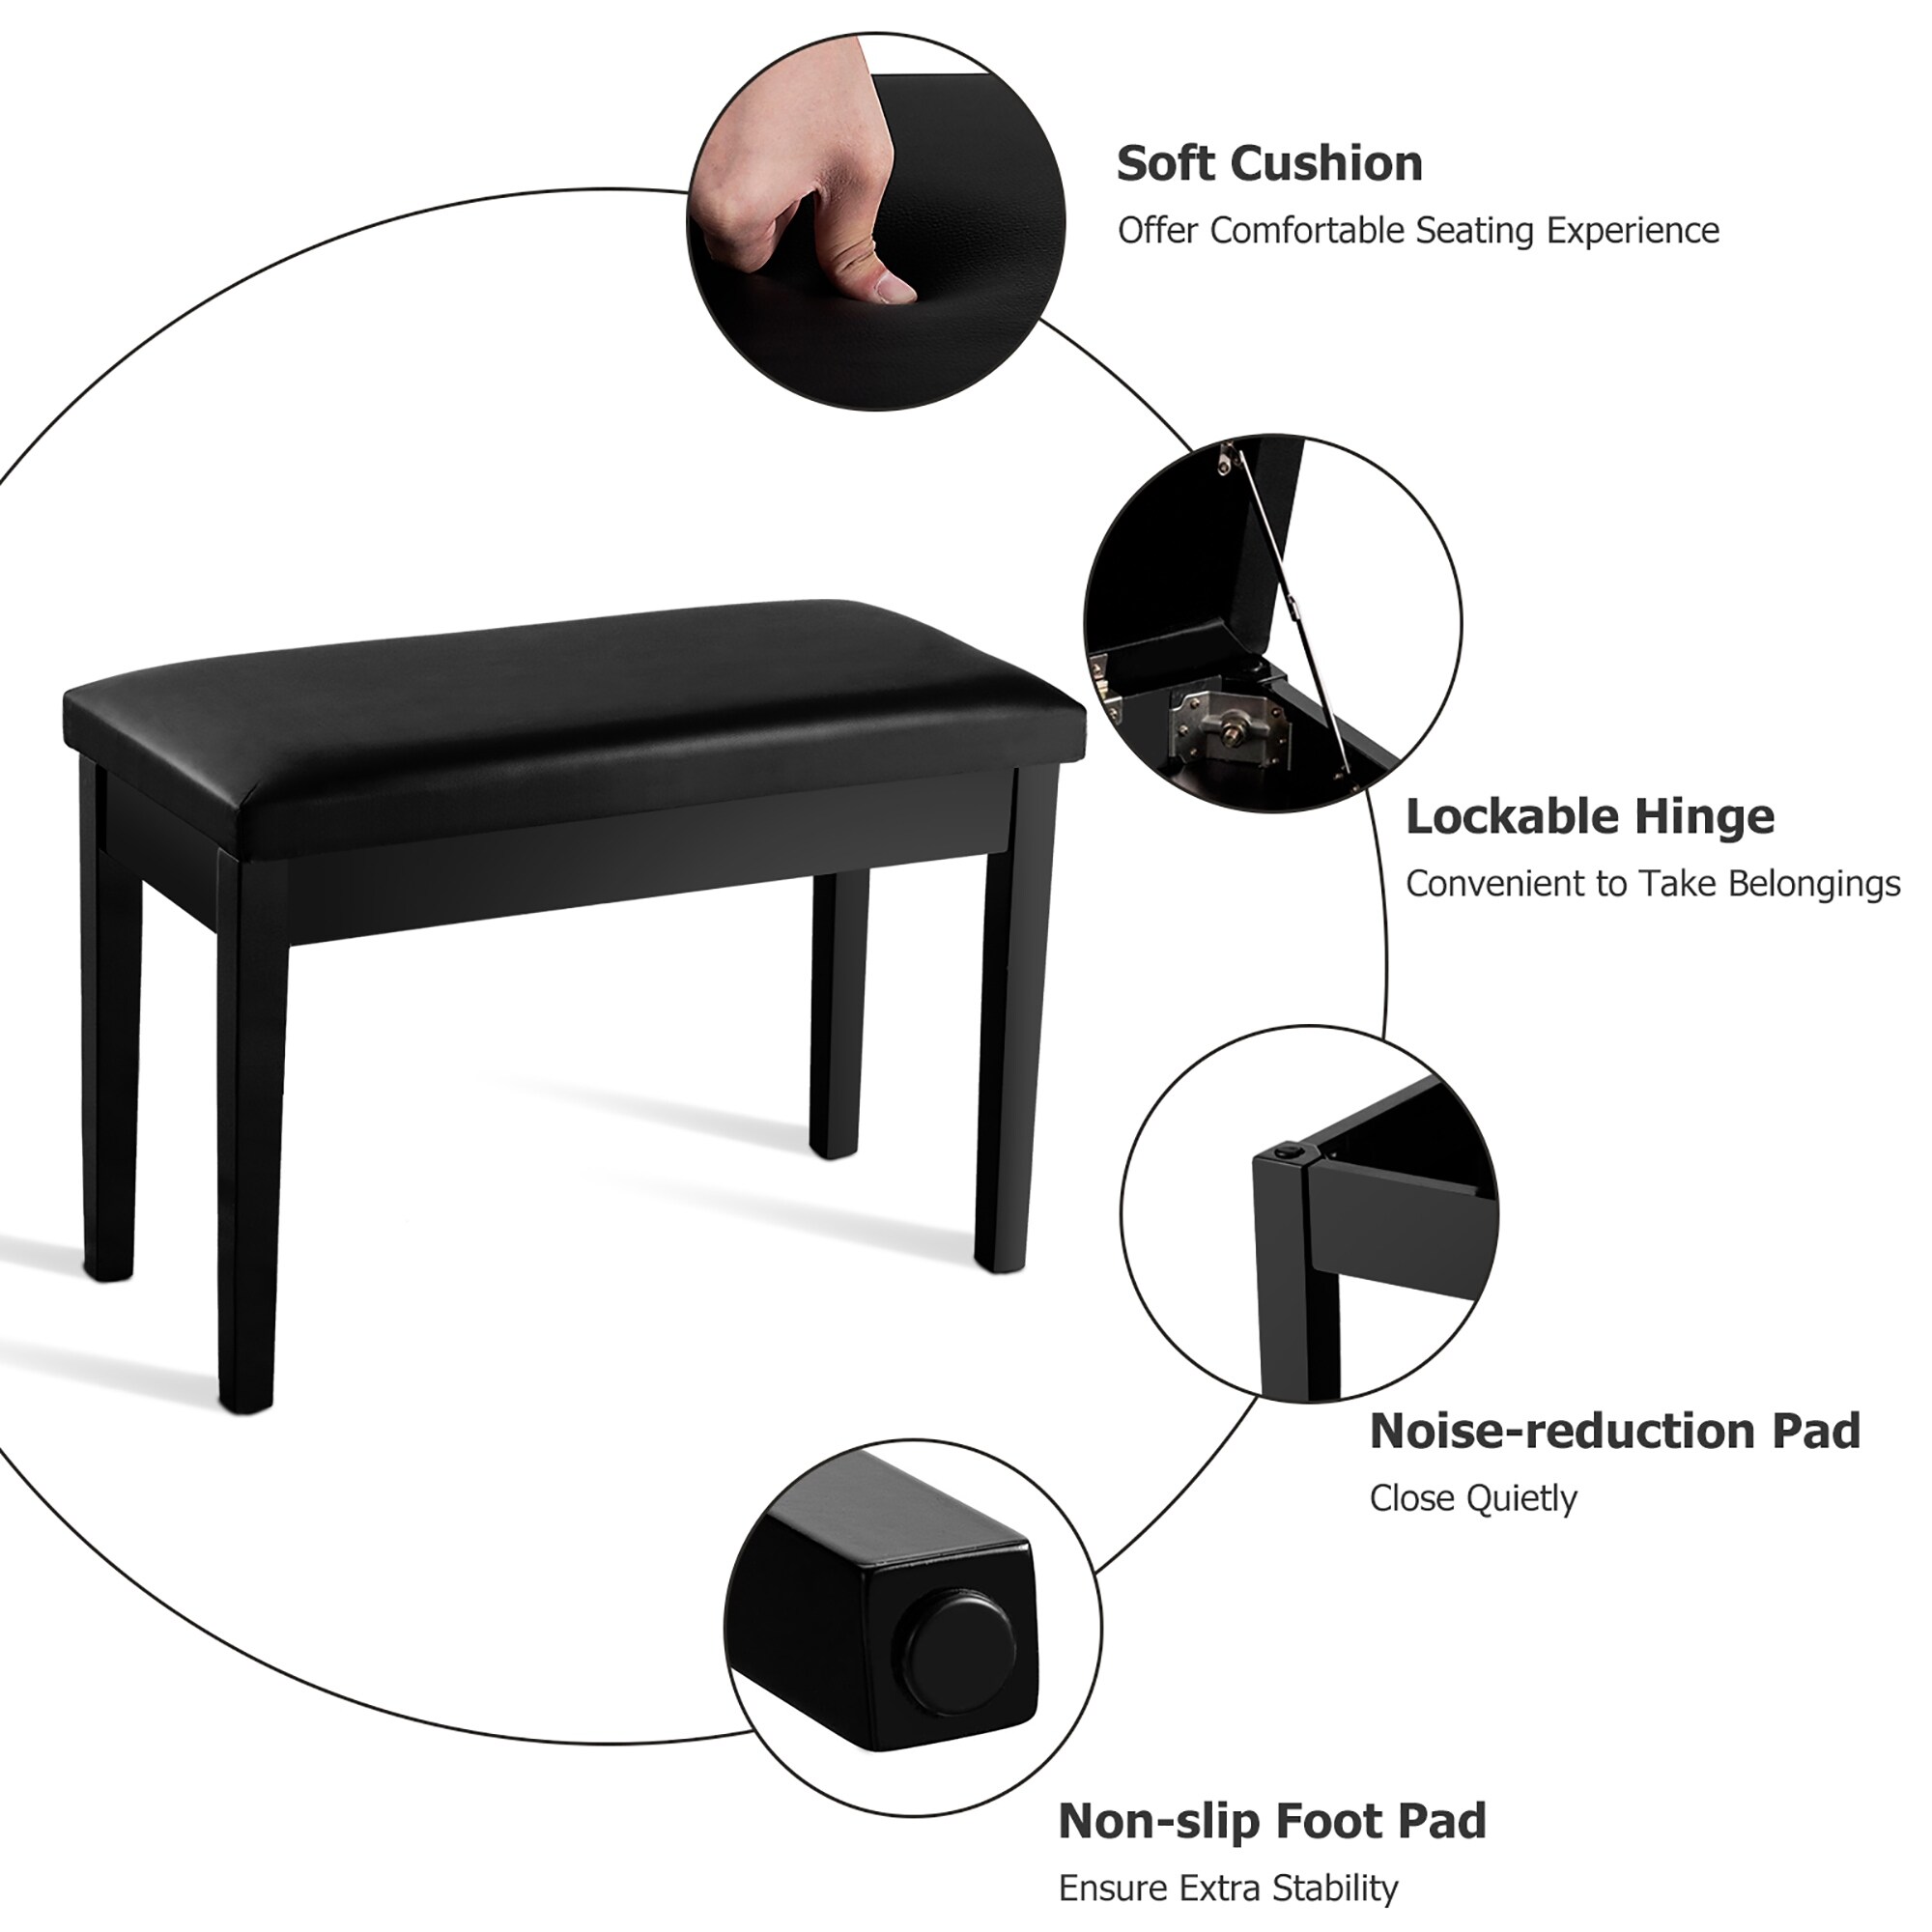 Piano Benches PU Leather Padded Duet Double Comfortable Artist Concert Seat Chair Stool Storage Black 